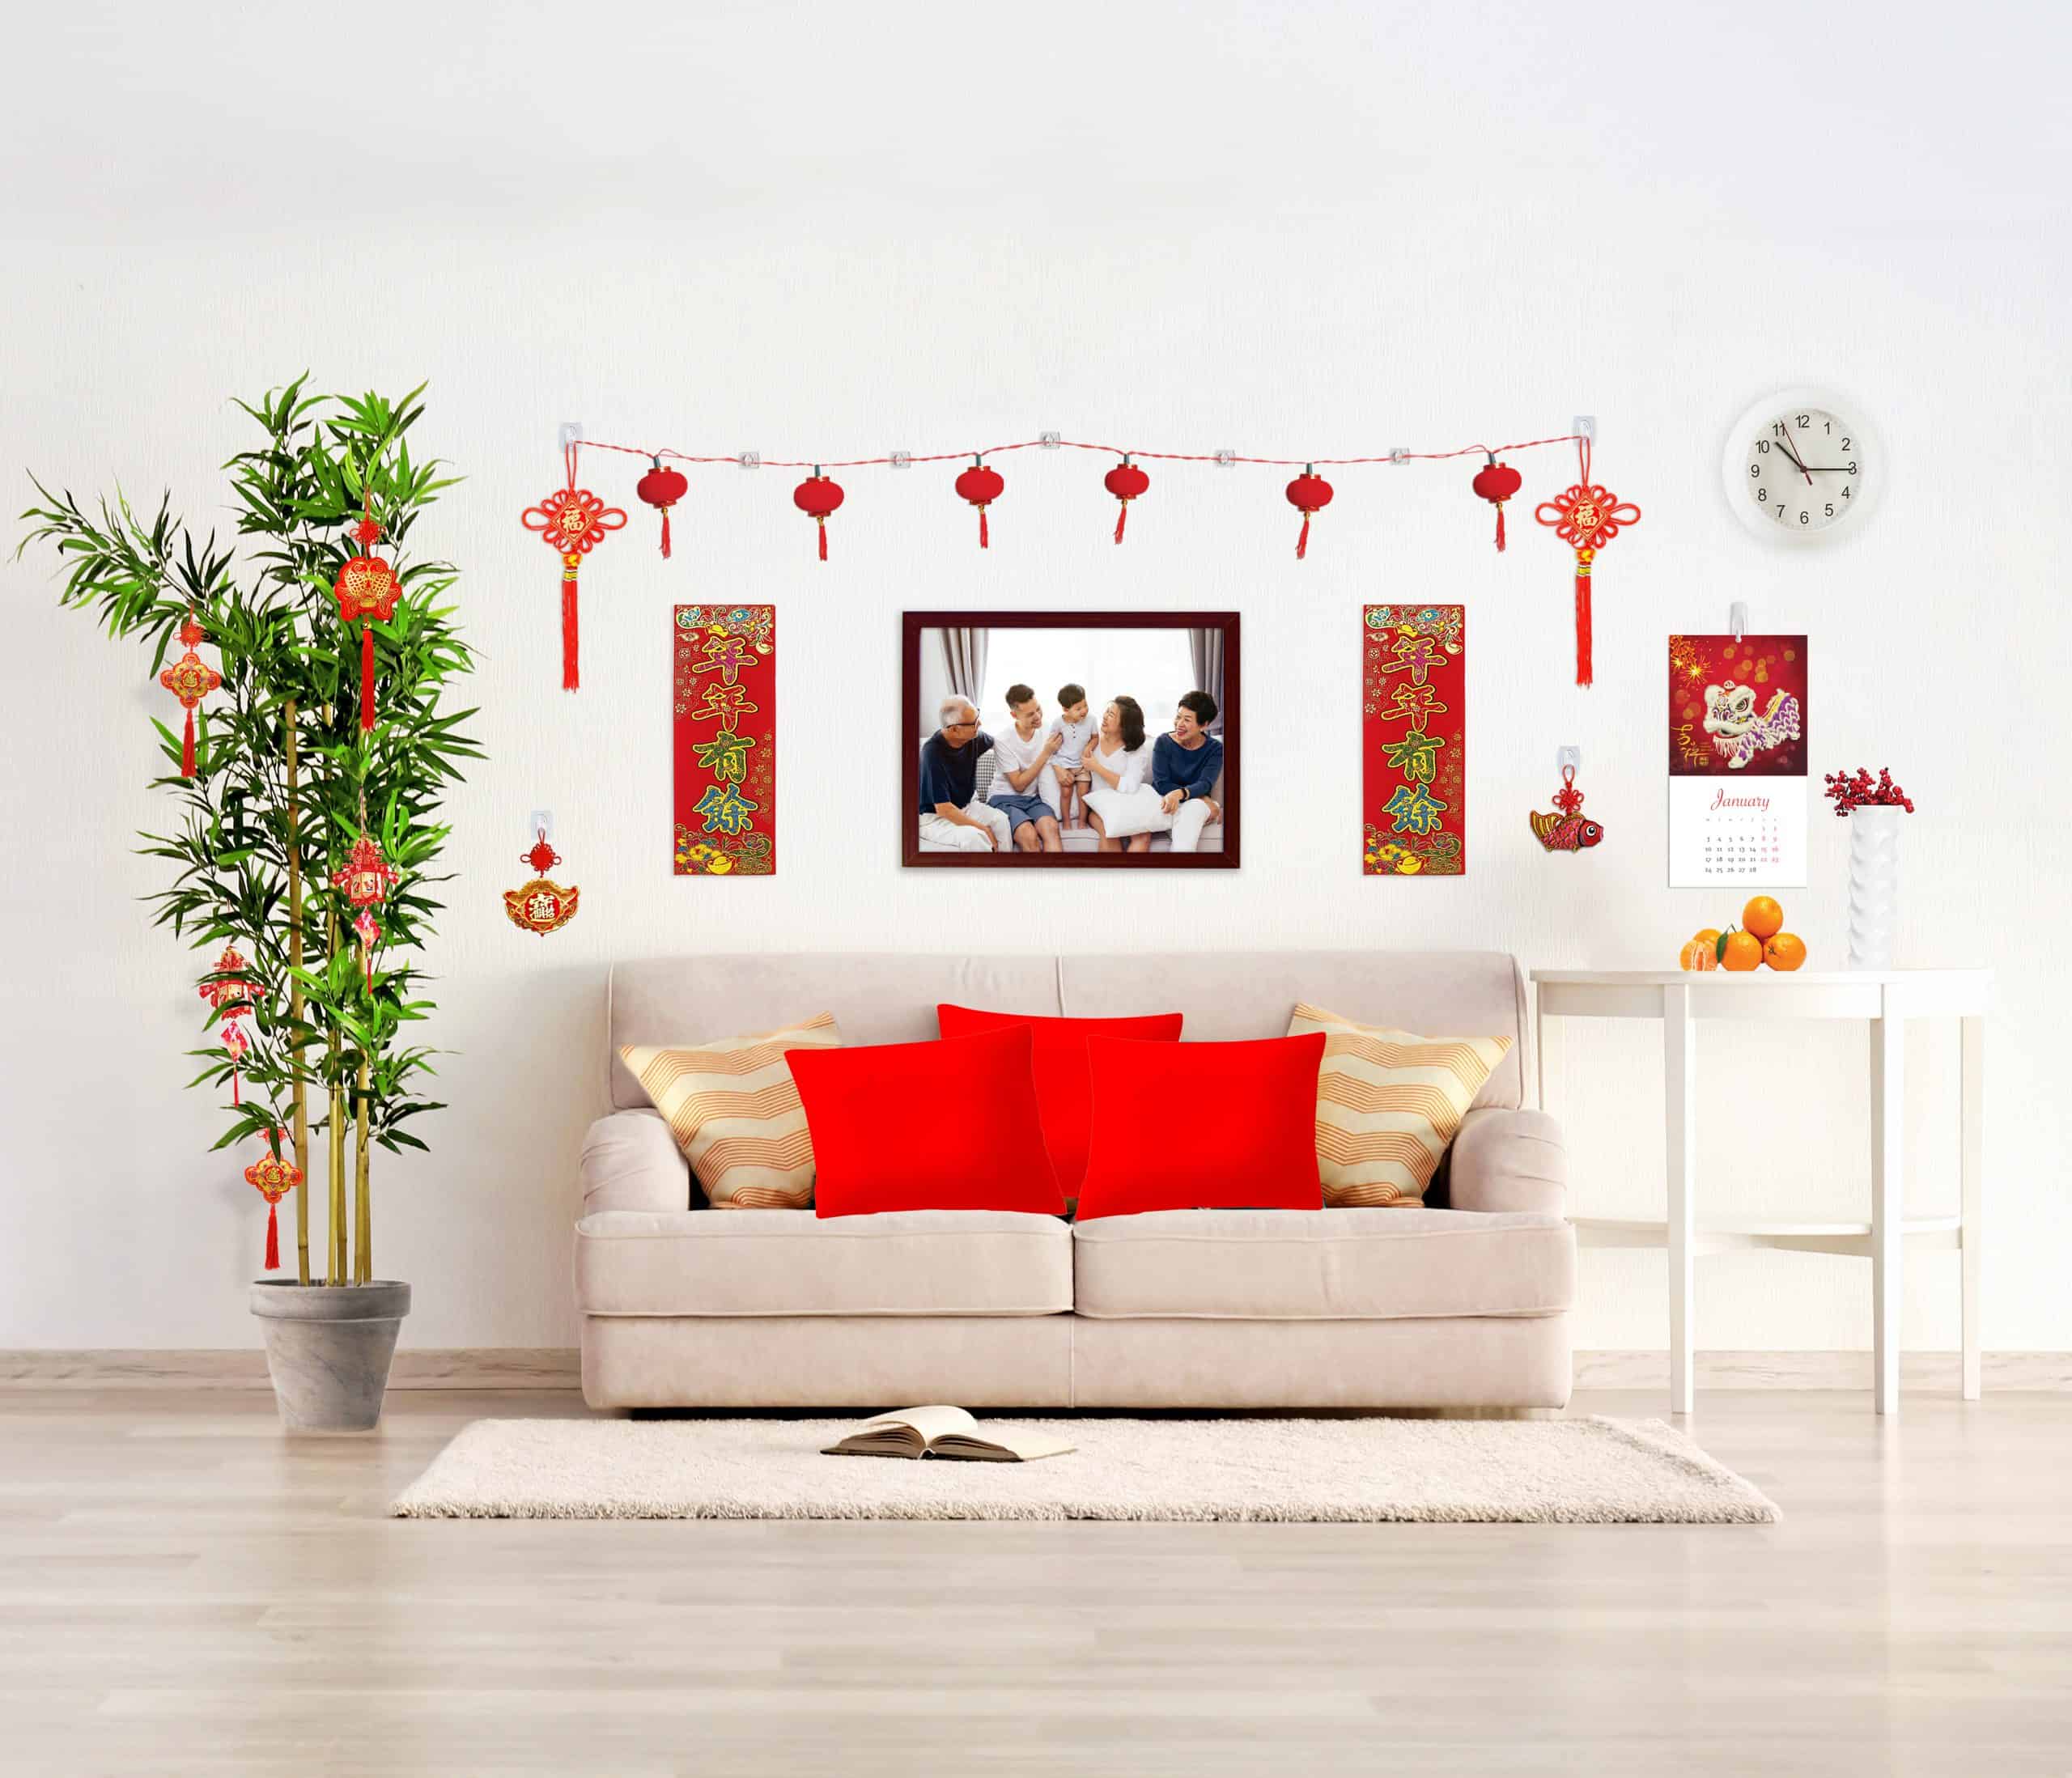 Useful Tips to Prepare Your Home for CNY